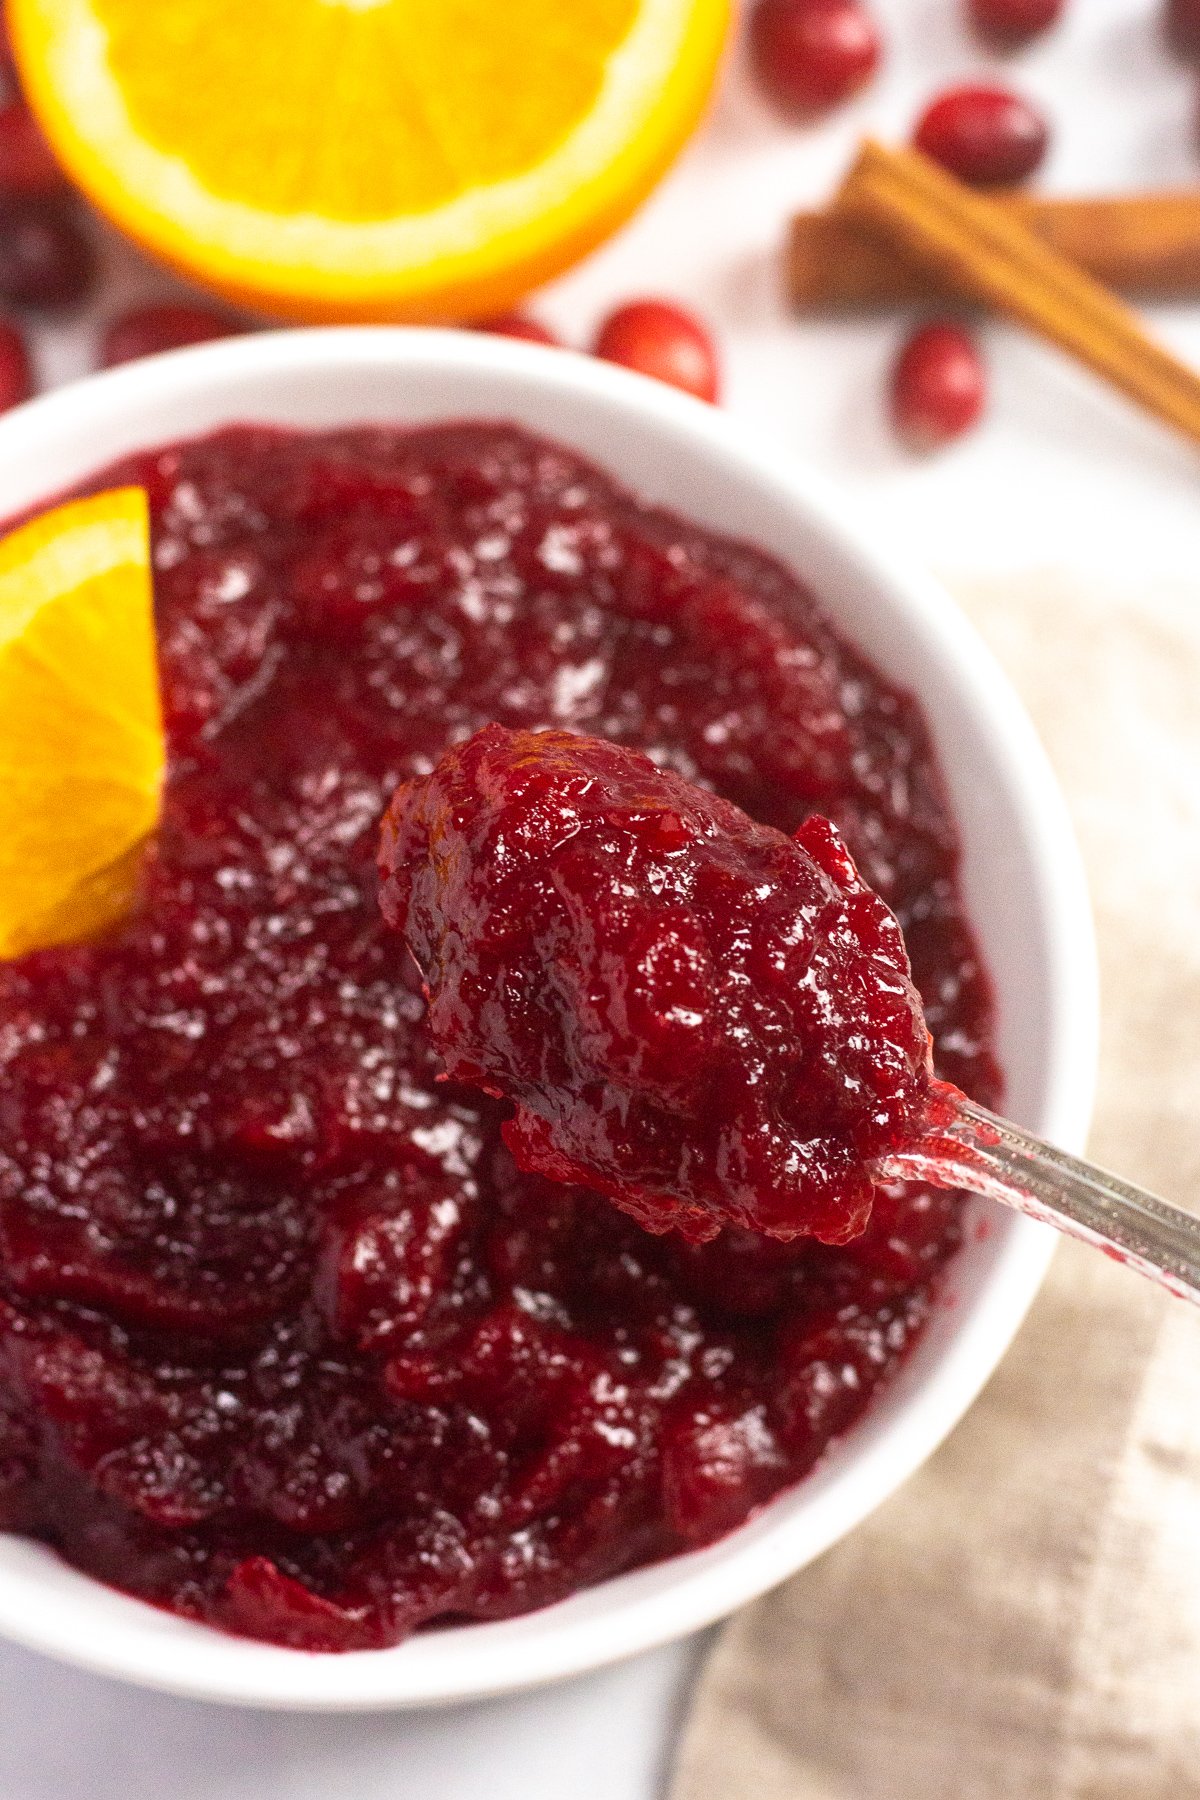 Spoonful of cranberry sauce hovering over serving bowl.